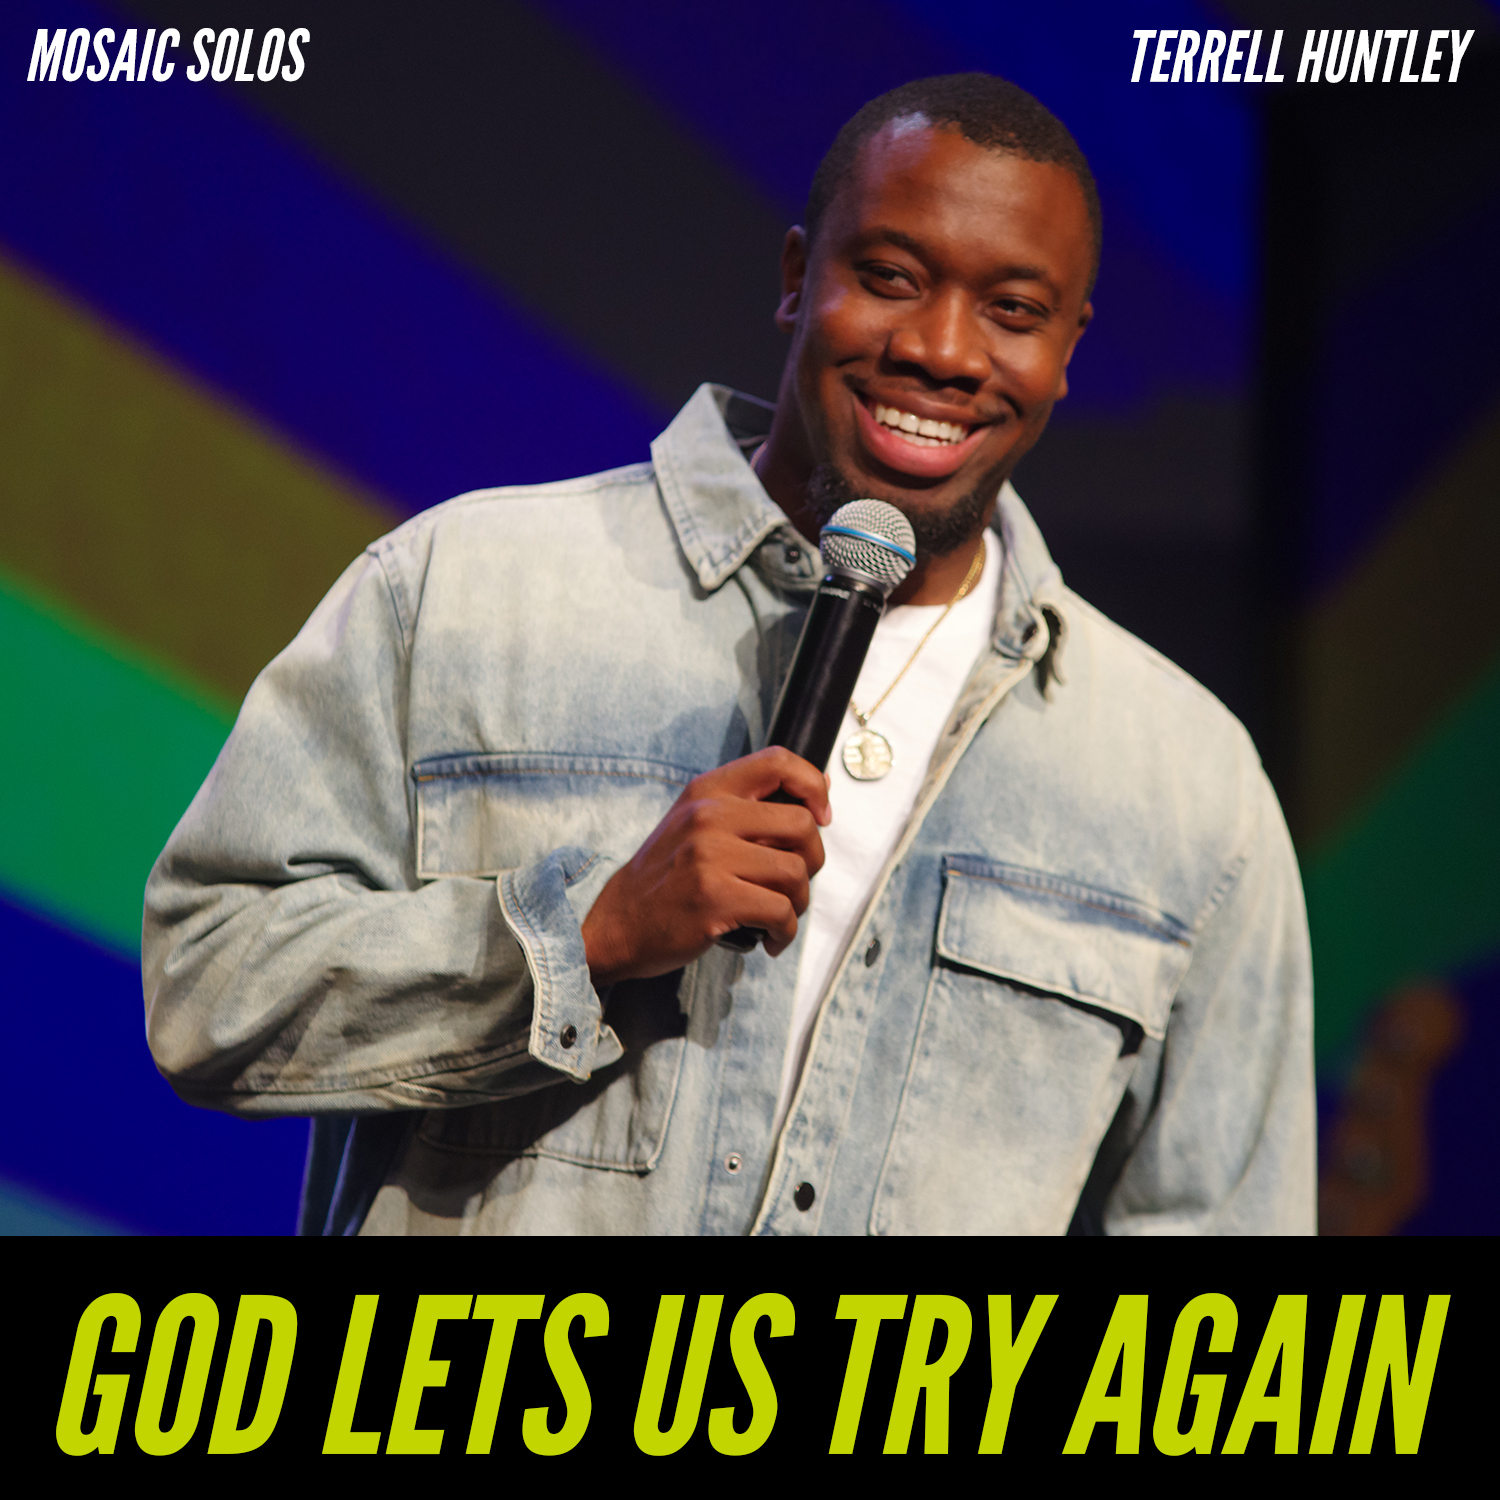 God Lets Us Try Again - Terrell Huntley